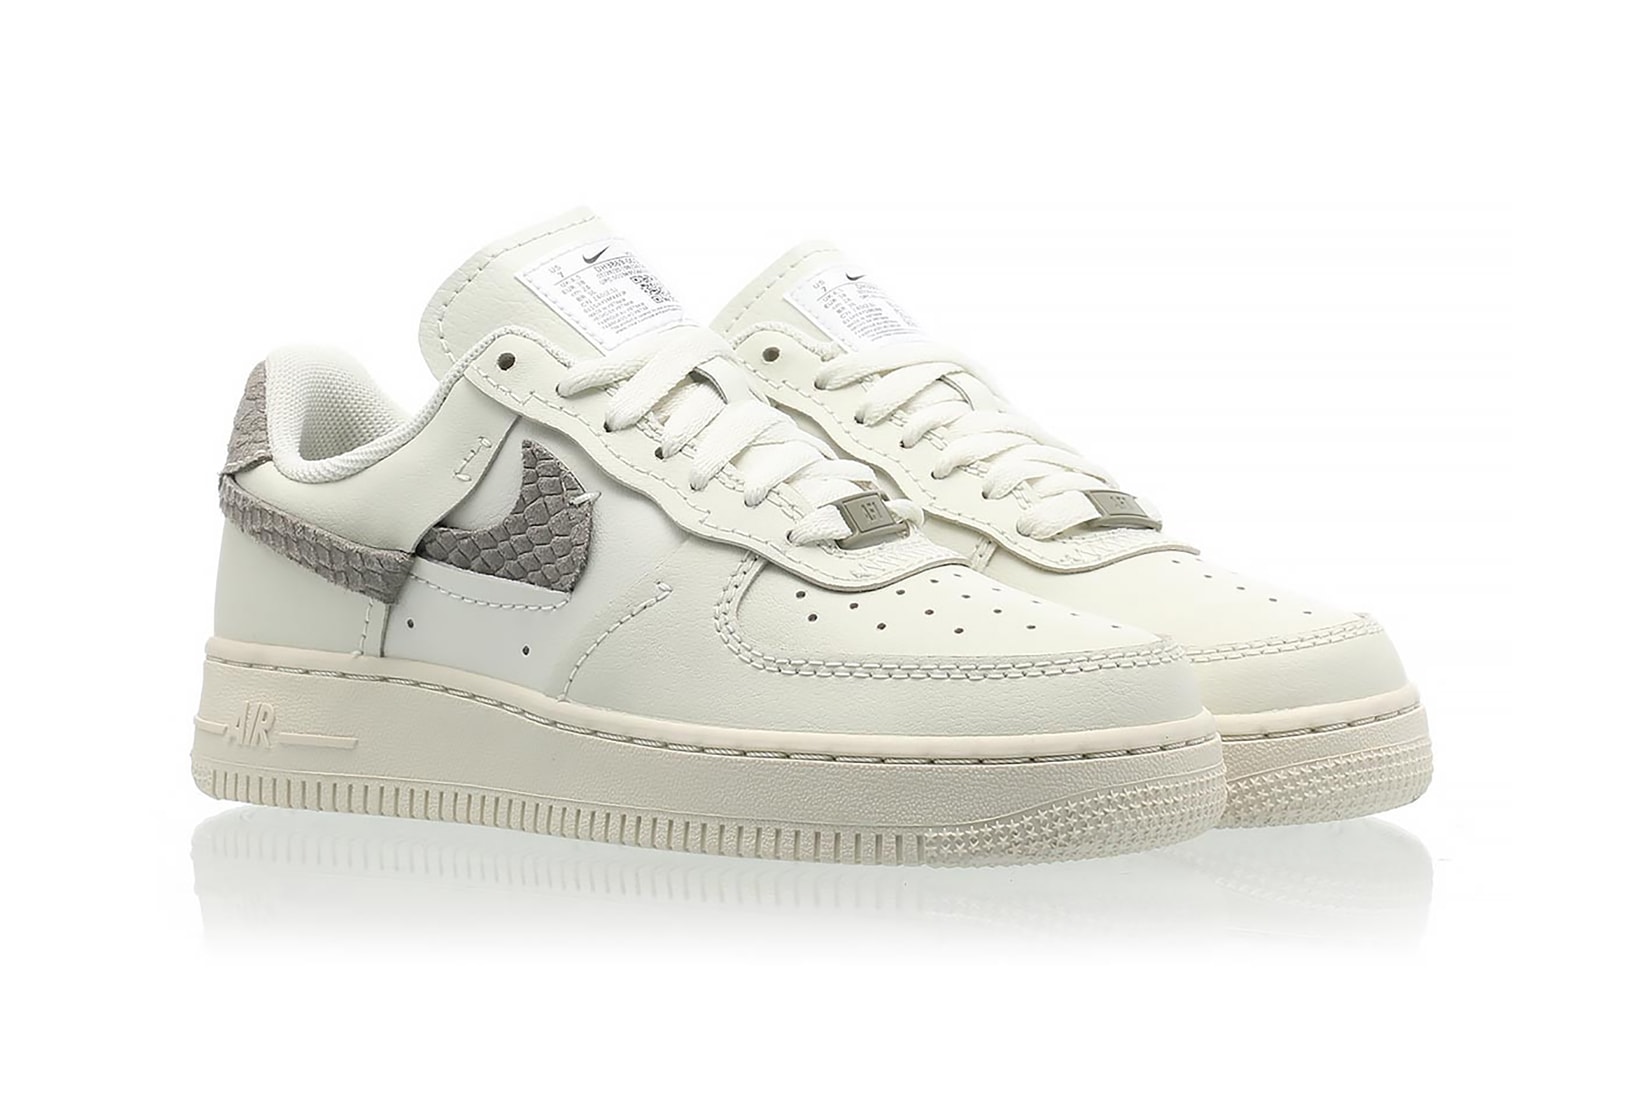 nike air force 1 af1 lxx sea glass womens sneakers gray silver white colorway shoes footwear kicks sneakerhead lateral laces